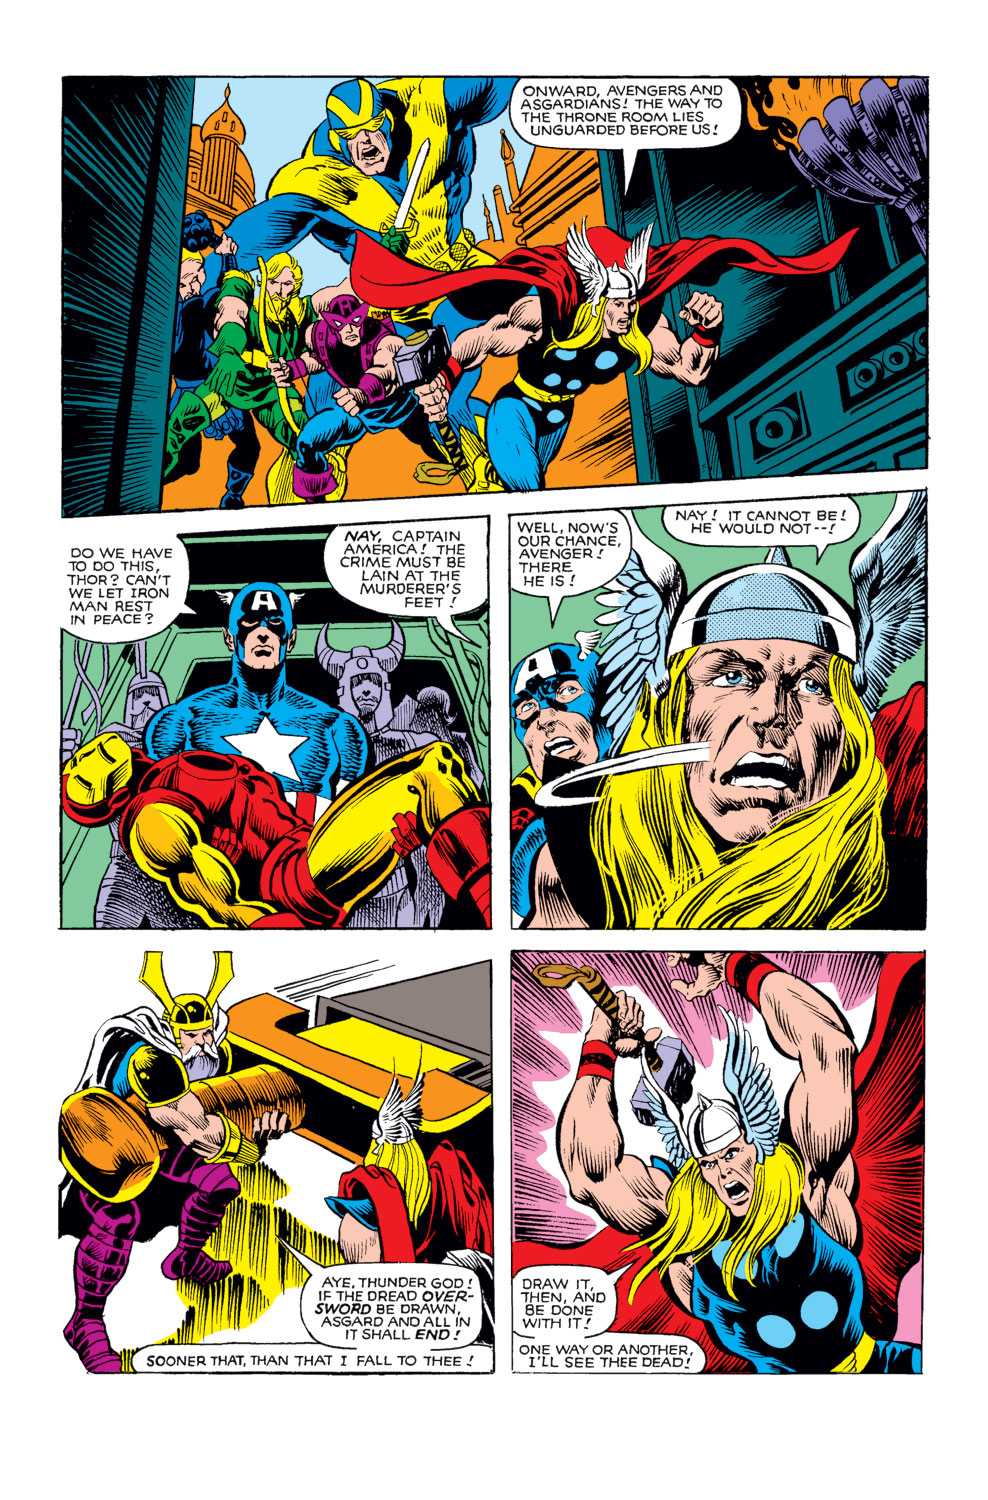 What If? (1977) issue 25 - Thor and the Avengers battled the gods - Page 30